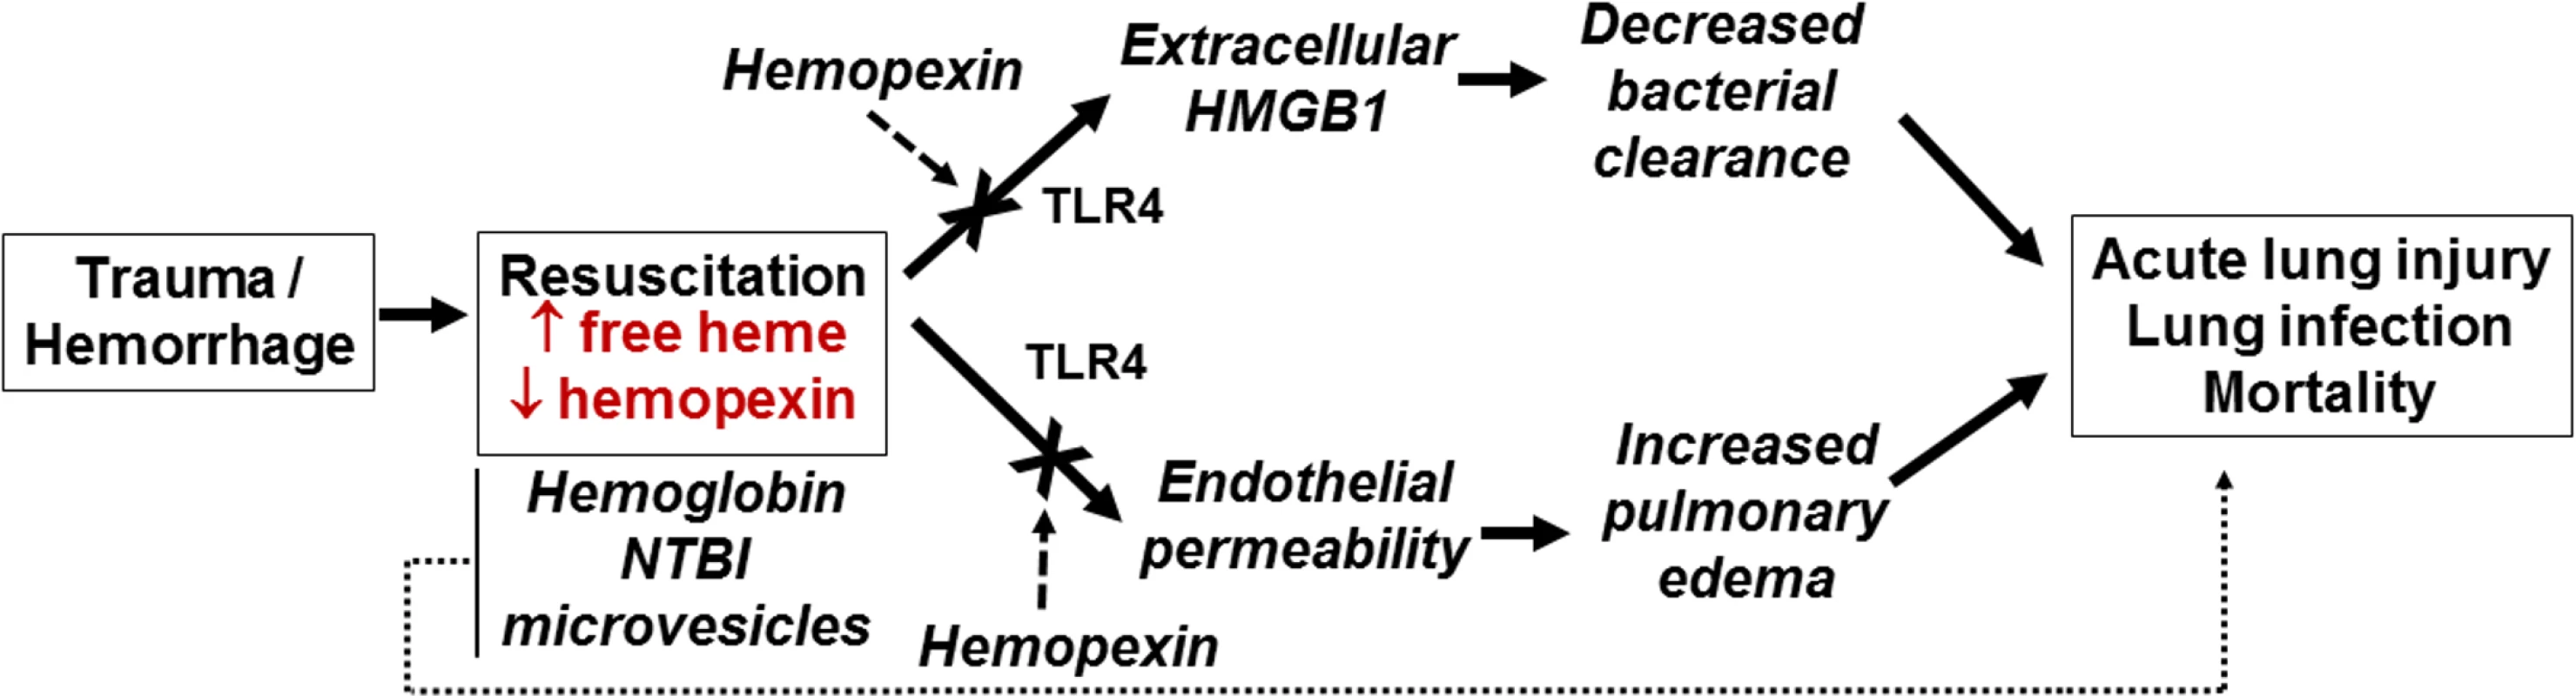 Proposed mechanisms for free-heme-dependent potentiation of lung infection after trauma hemorrhage.